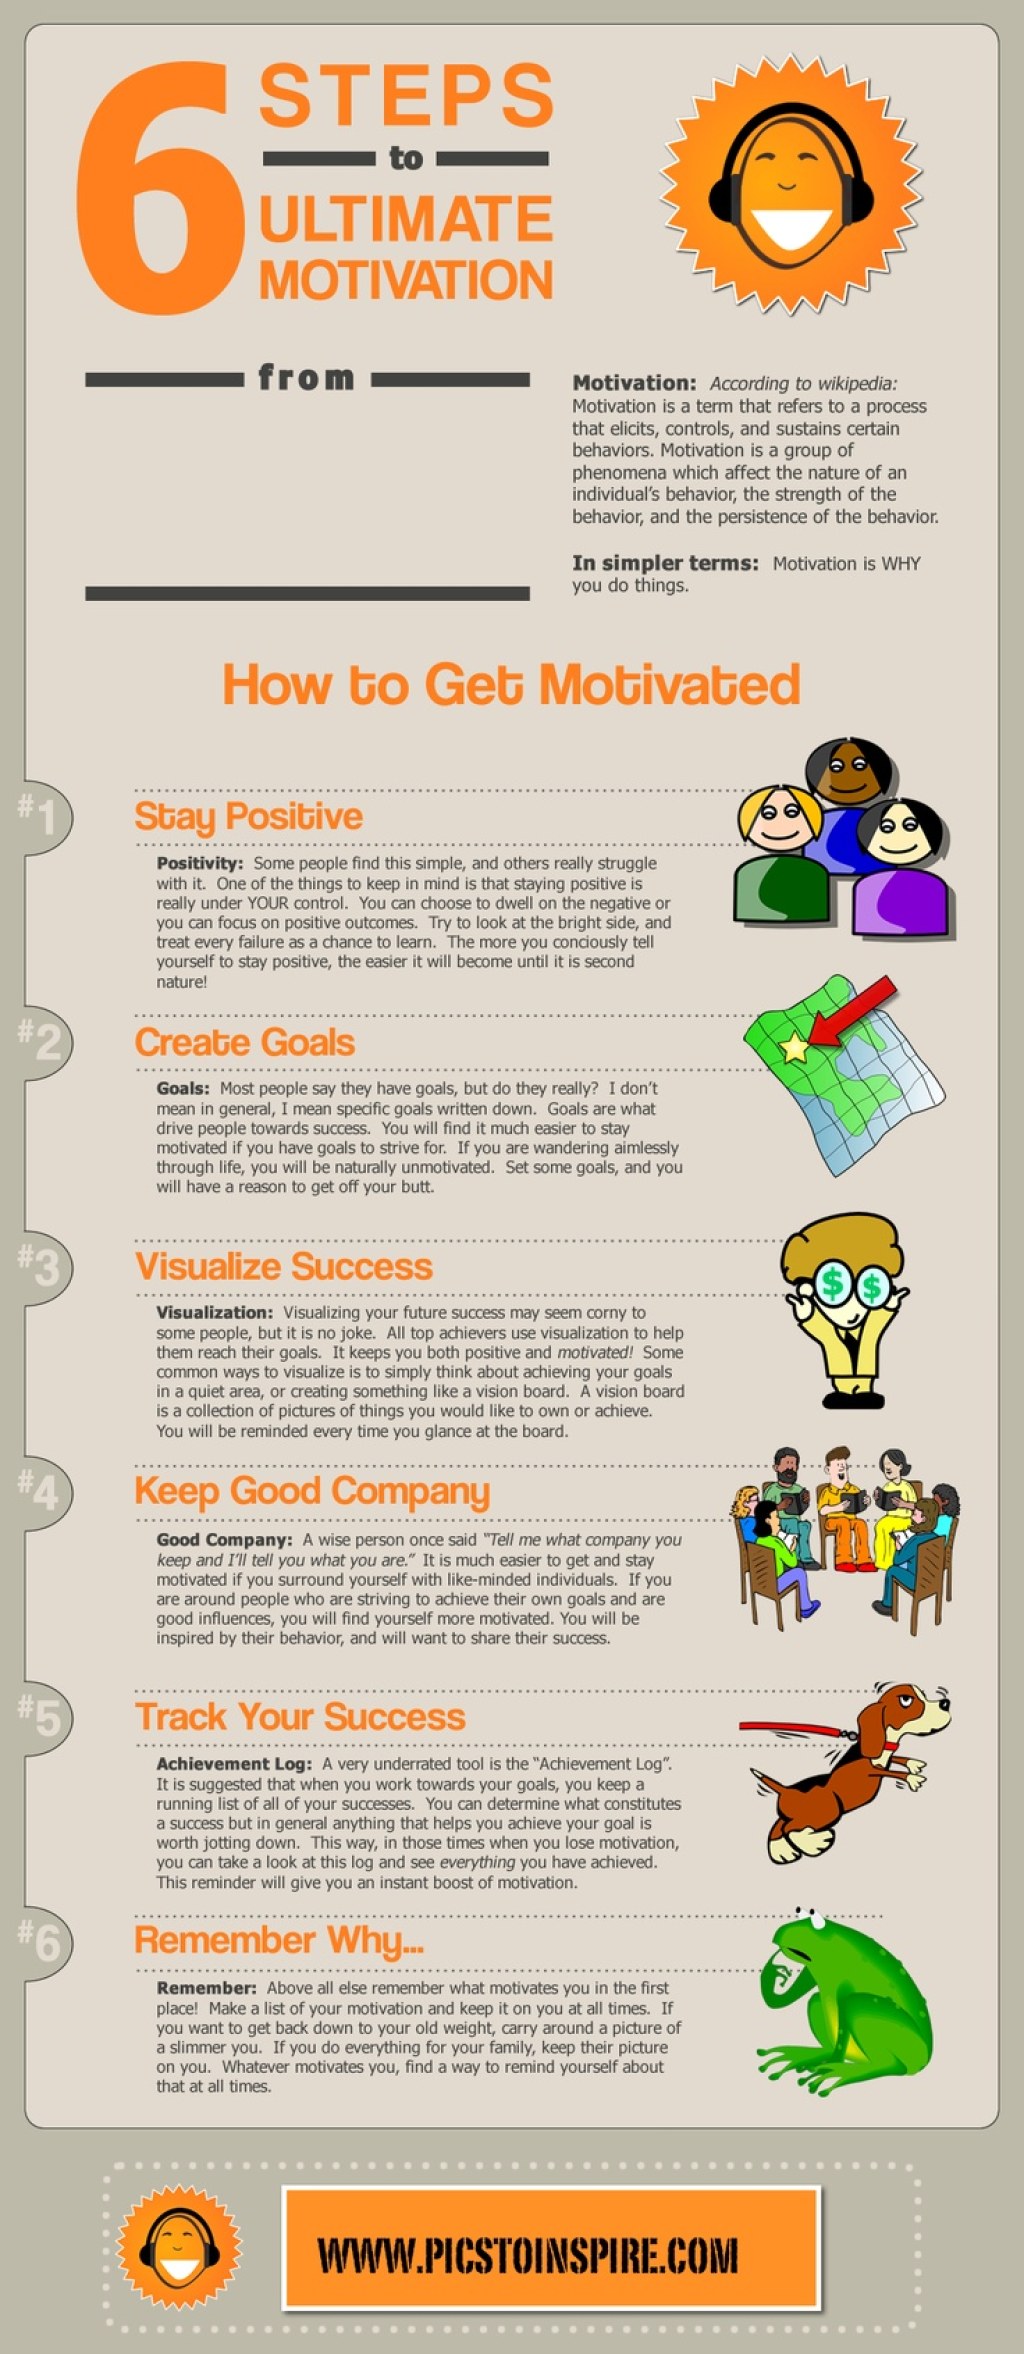 Picture of: Self Motivational Techniques for Employees in the Workplace